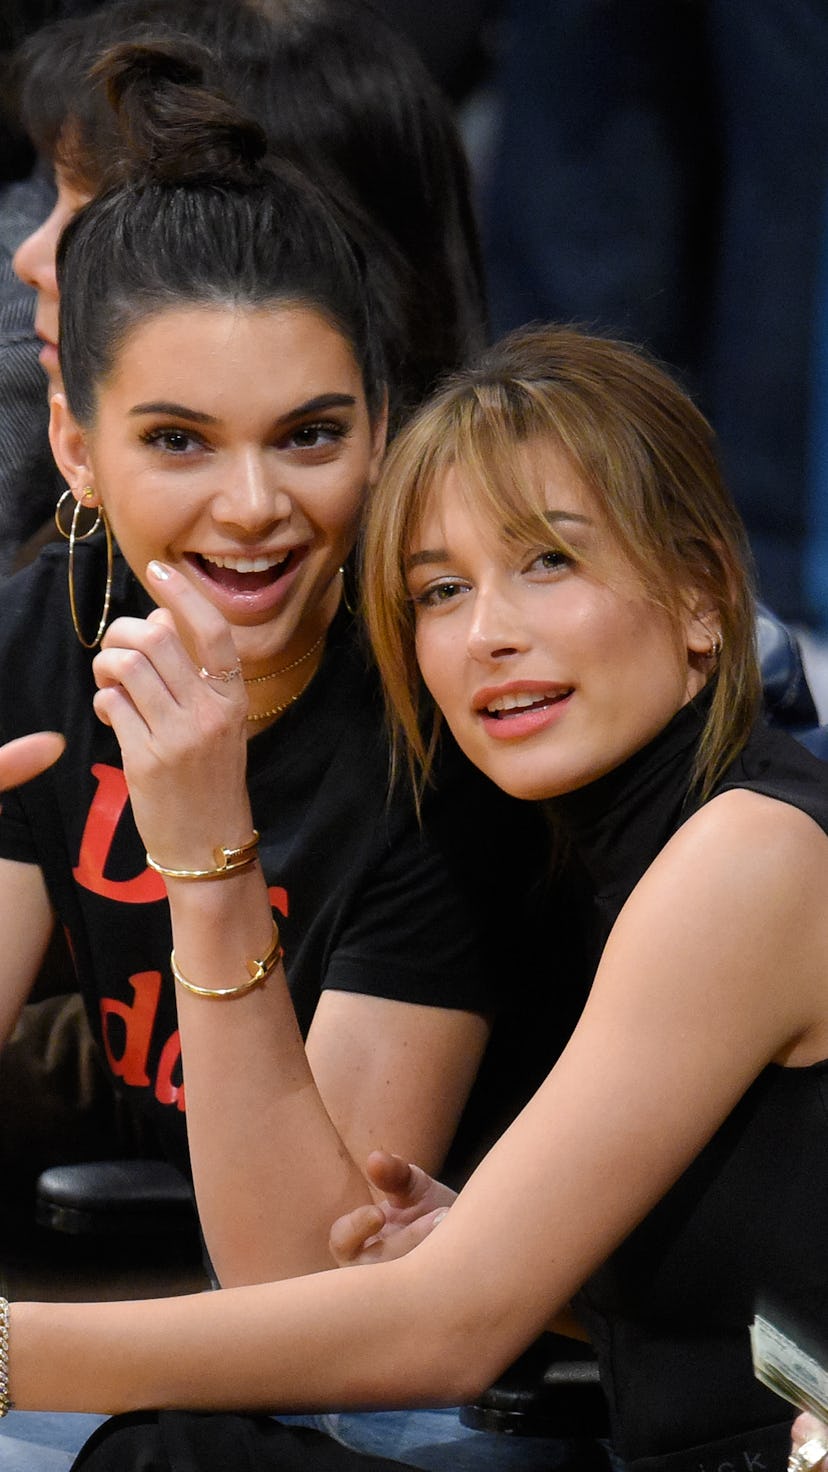 Best friends Kendall Jenner and Hailey Bieber attend a basketball game together.